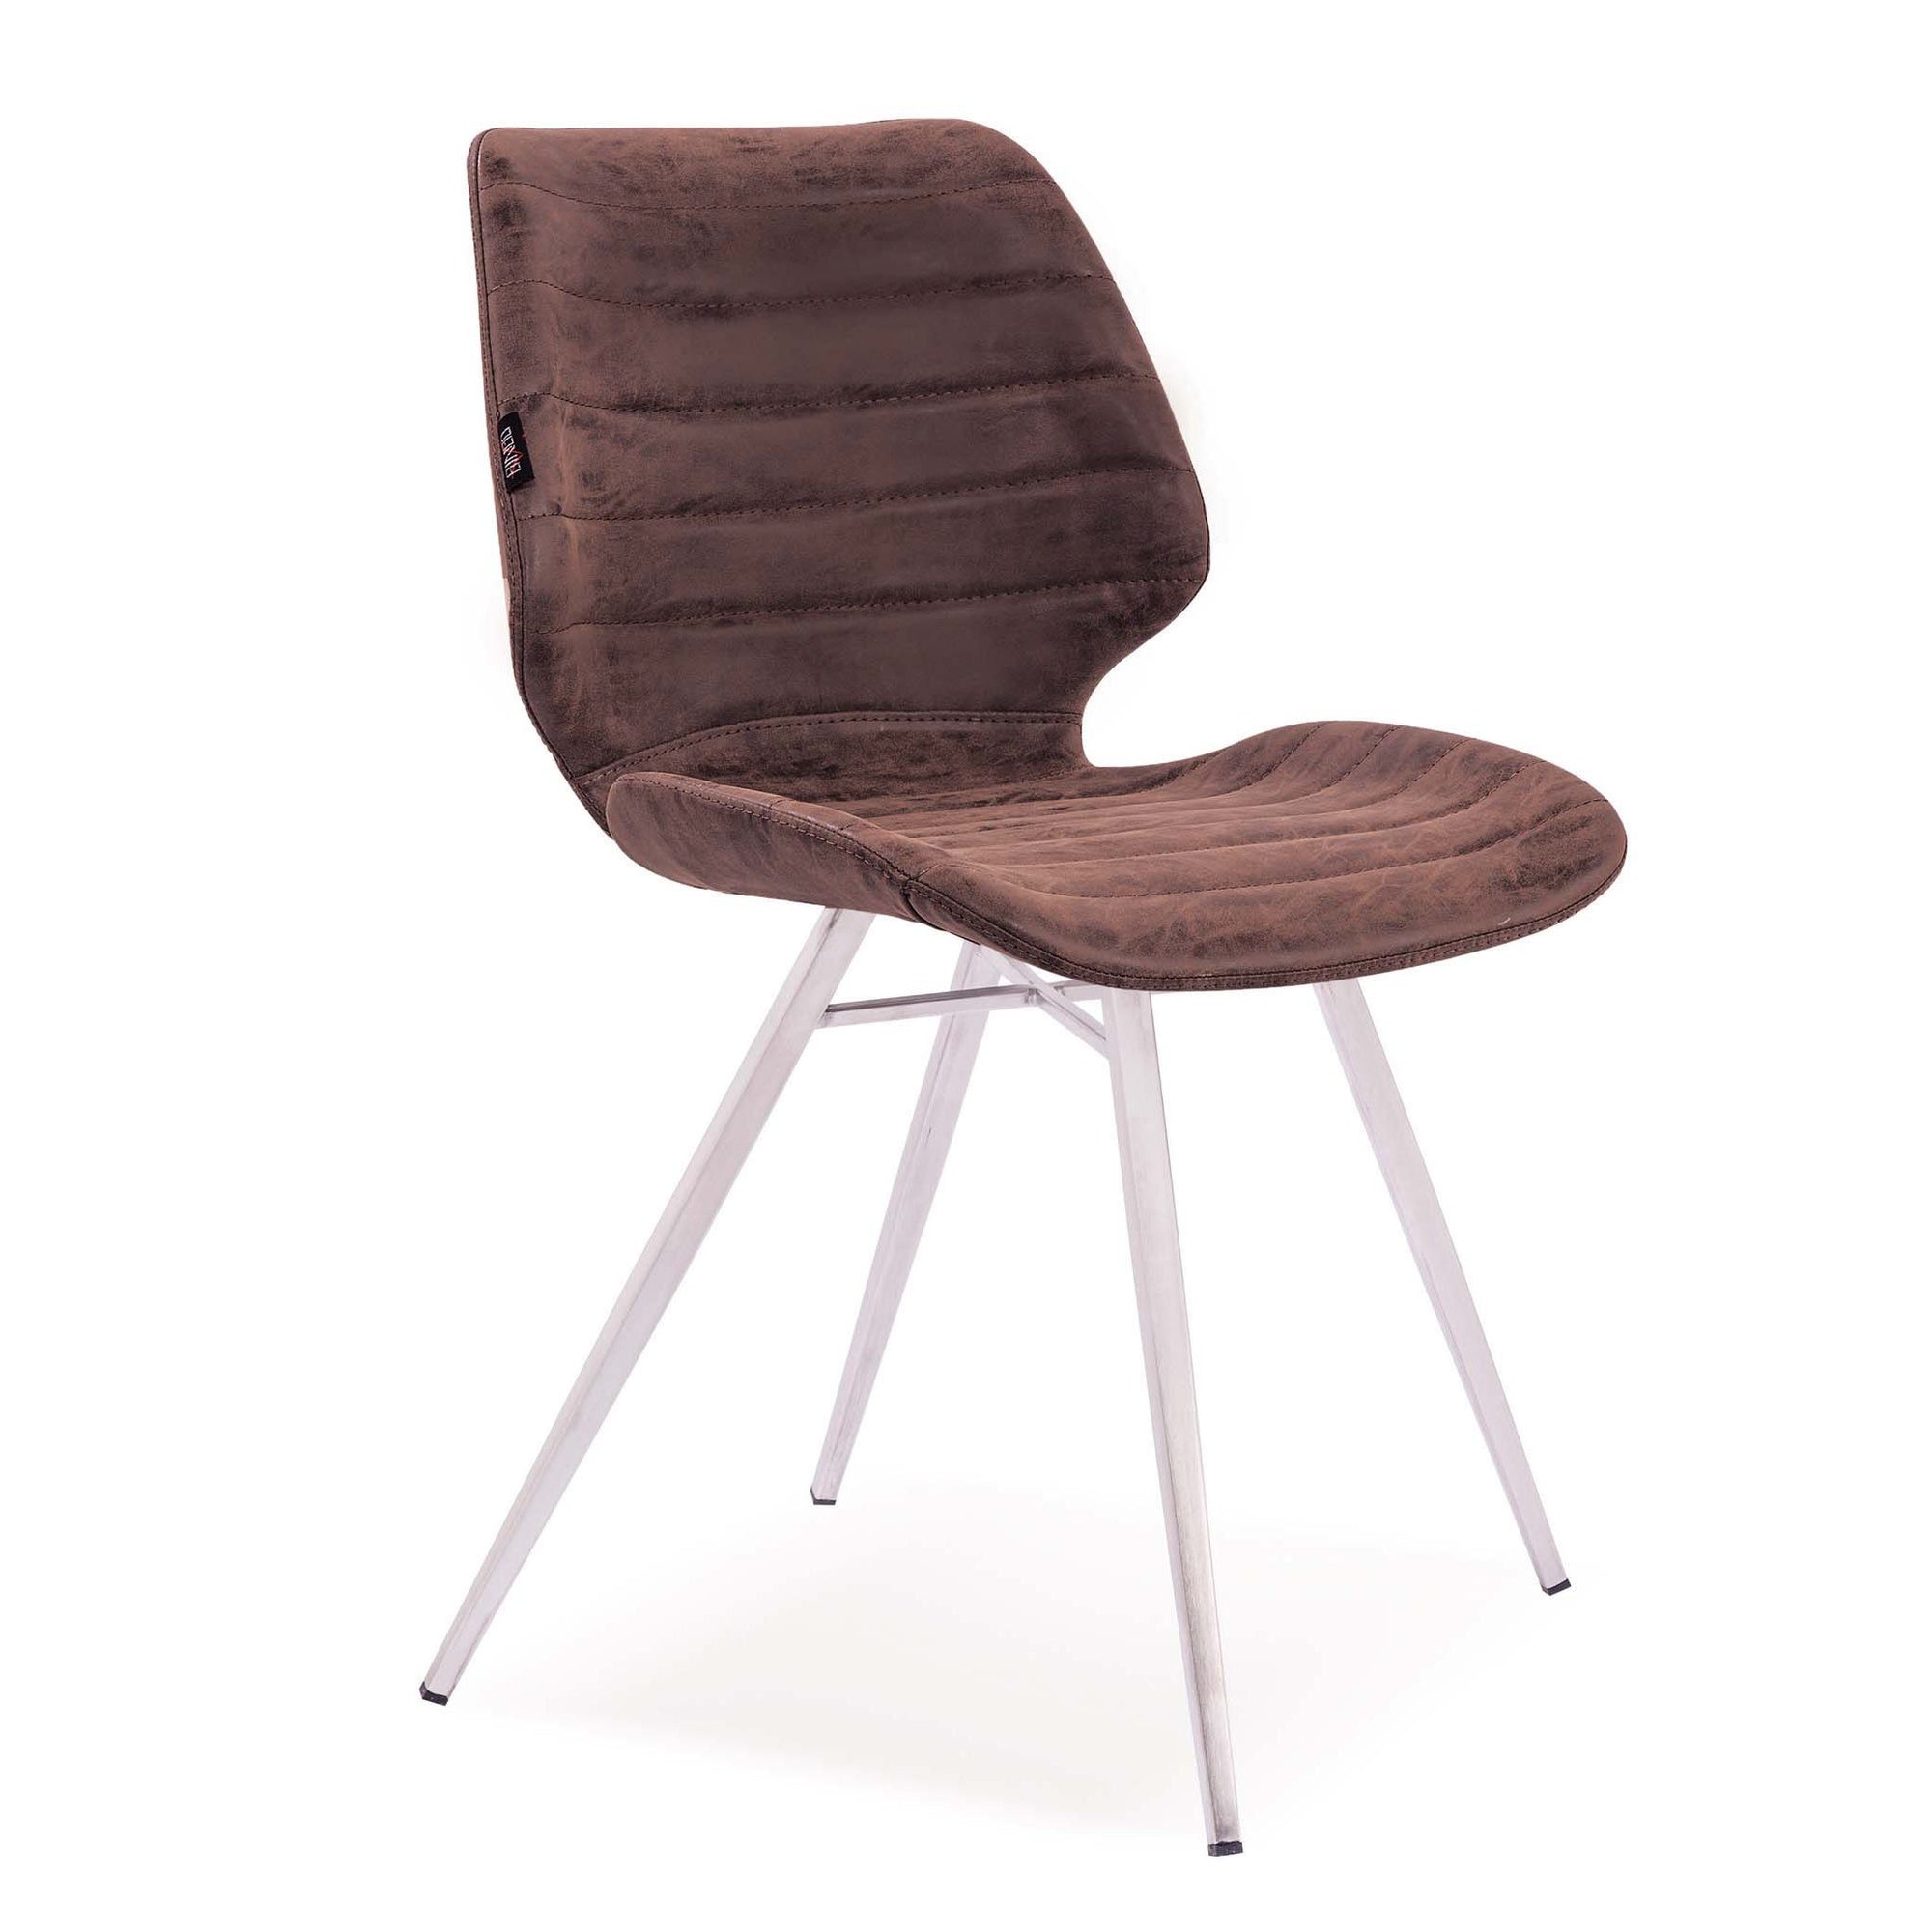 Bellini-Gina Dining Chair-Dining Chairs-MODTEMPO